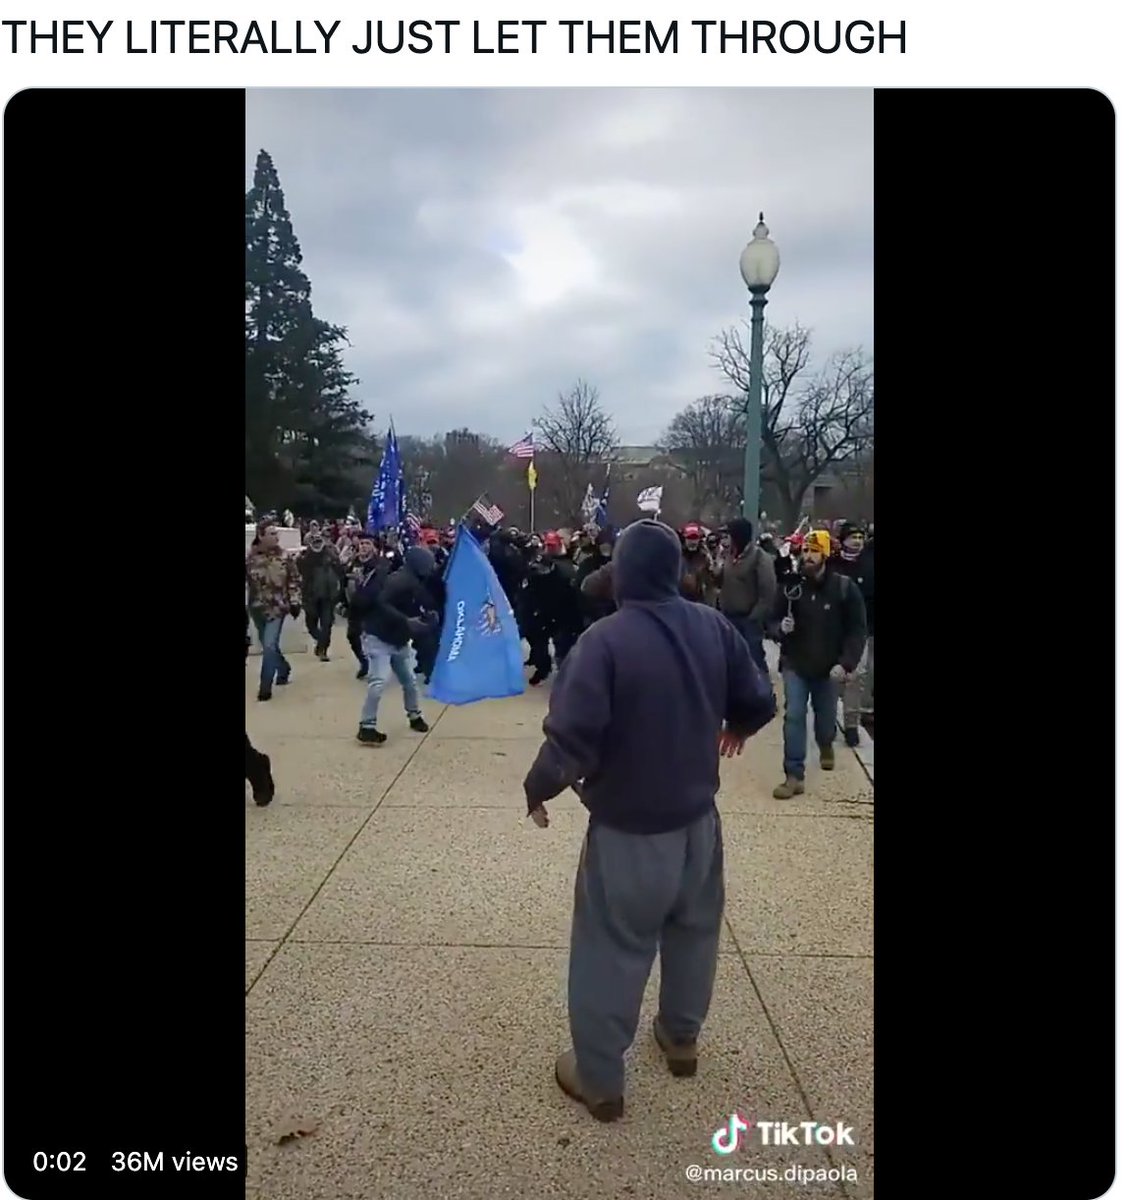 1:58PM: On the east side,  @marcusdipaola captures police being "completely overrun at one of the perimeter barricades."His video originally shared on TikTok gets shared on Twitter without proper context.  https://tiktok.com/@marcus.dipaola/video/6914723446496840965?lang=en